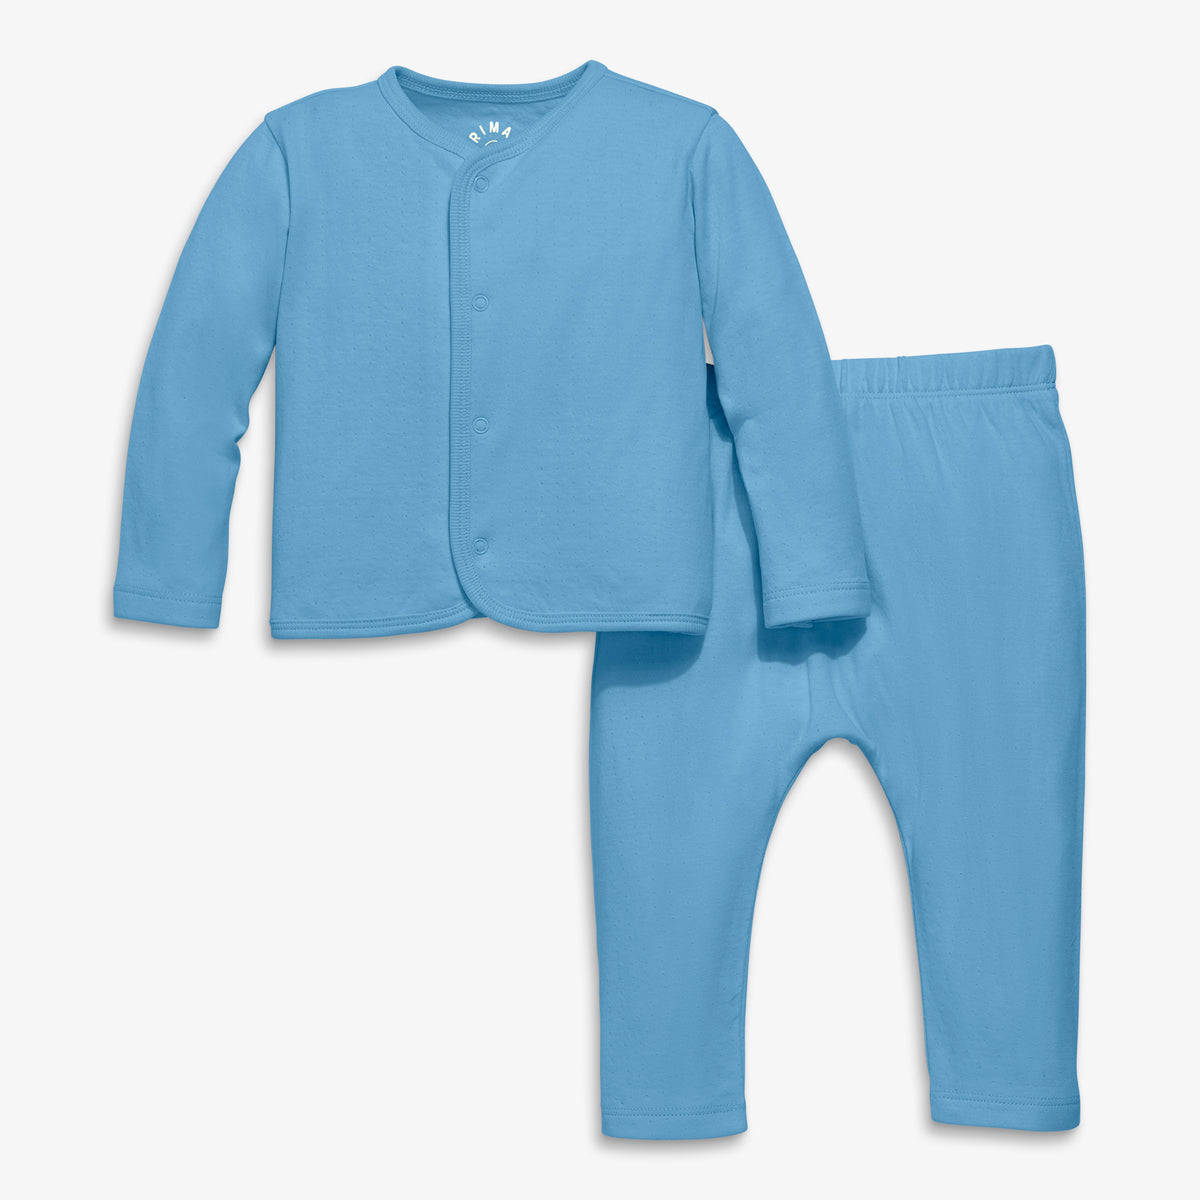 Baby pointelle two-piece set